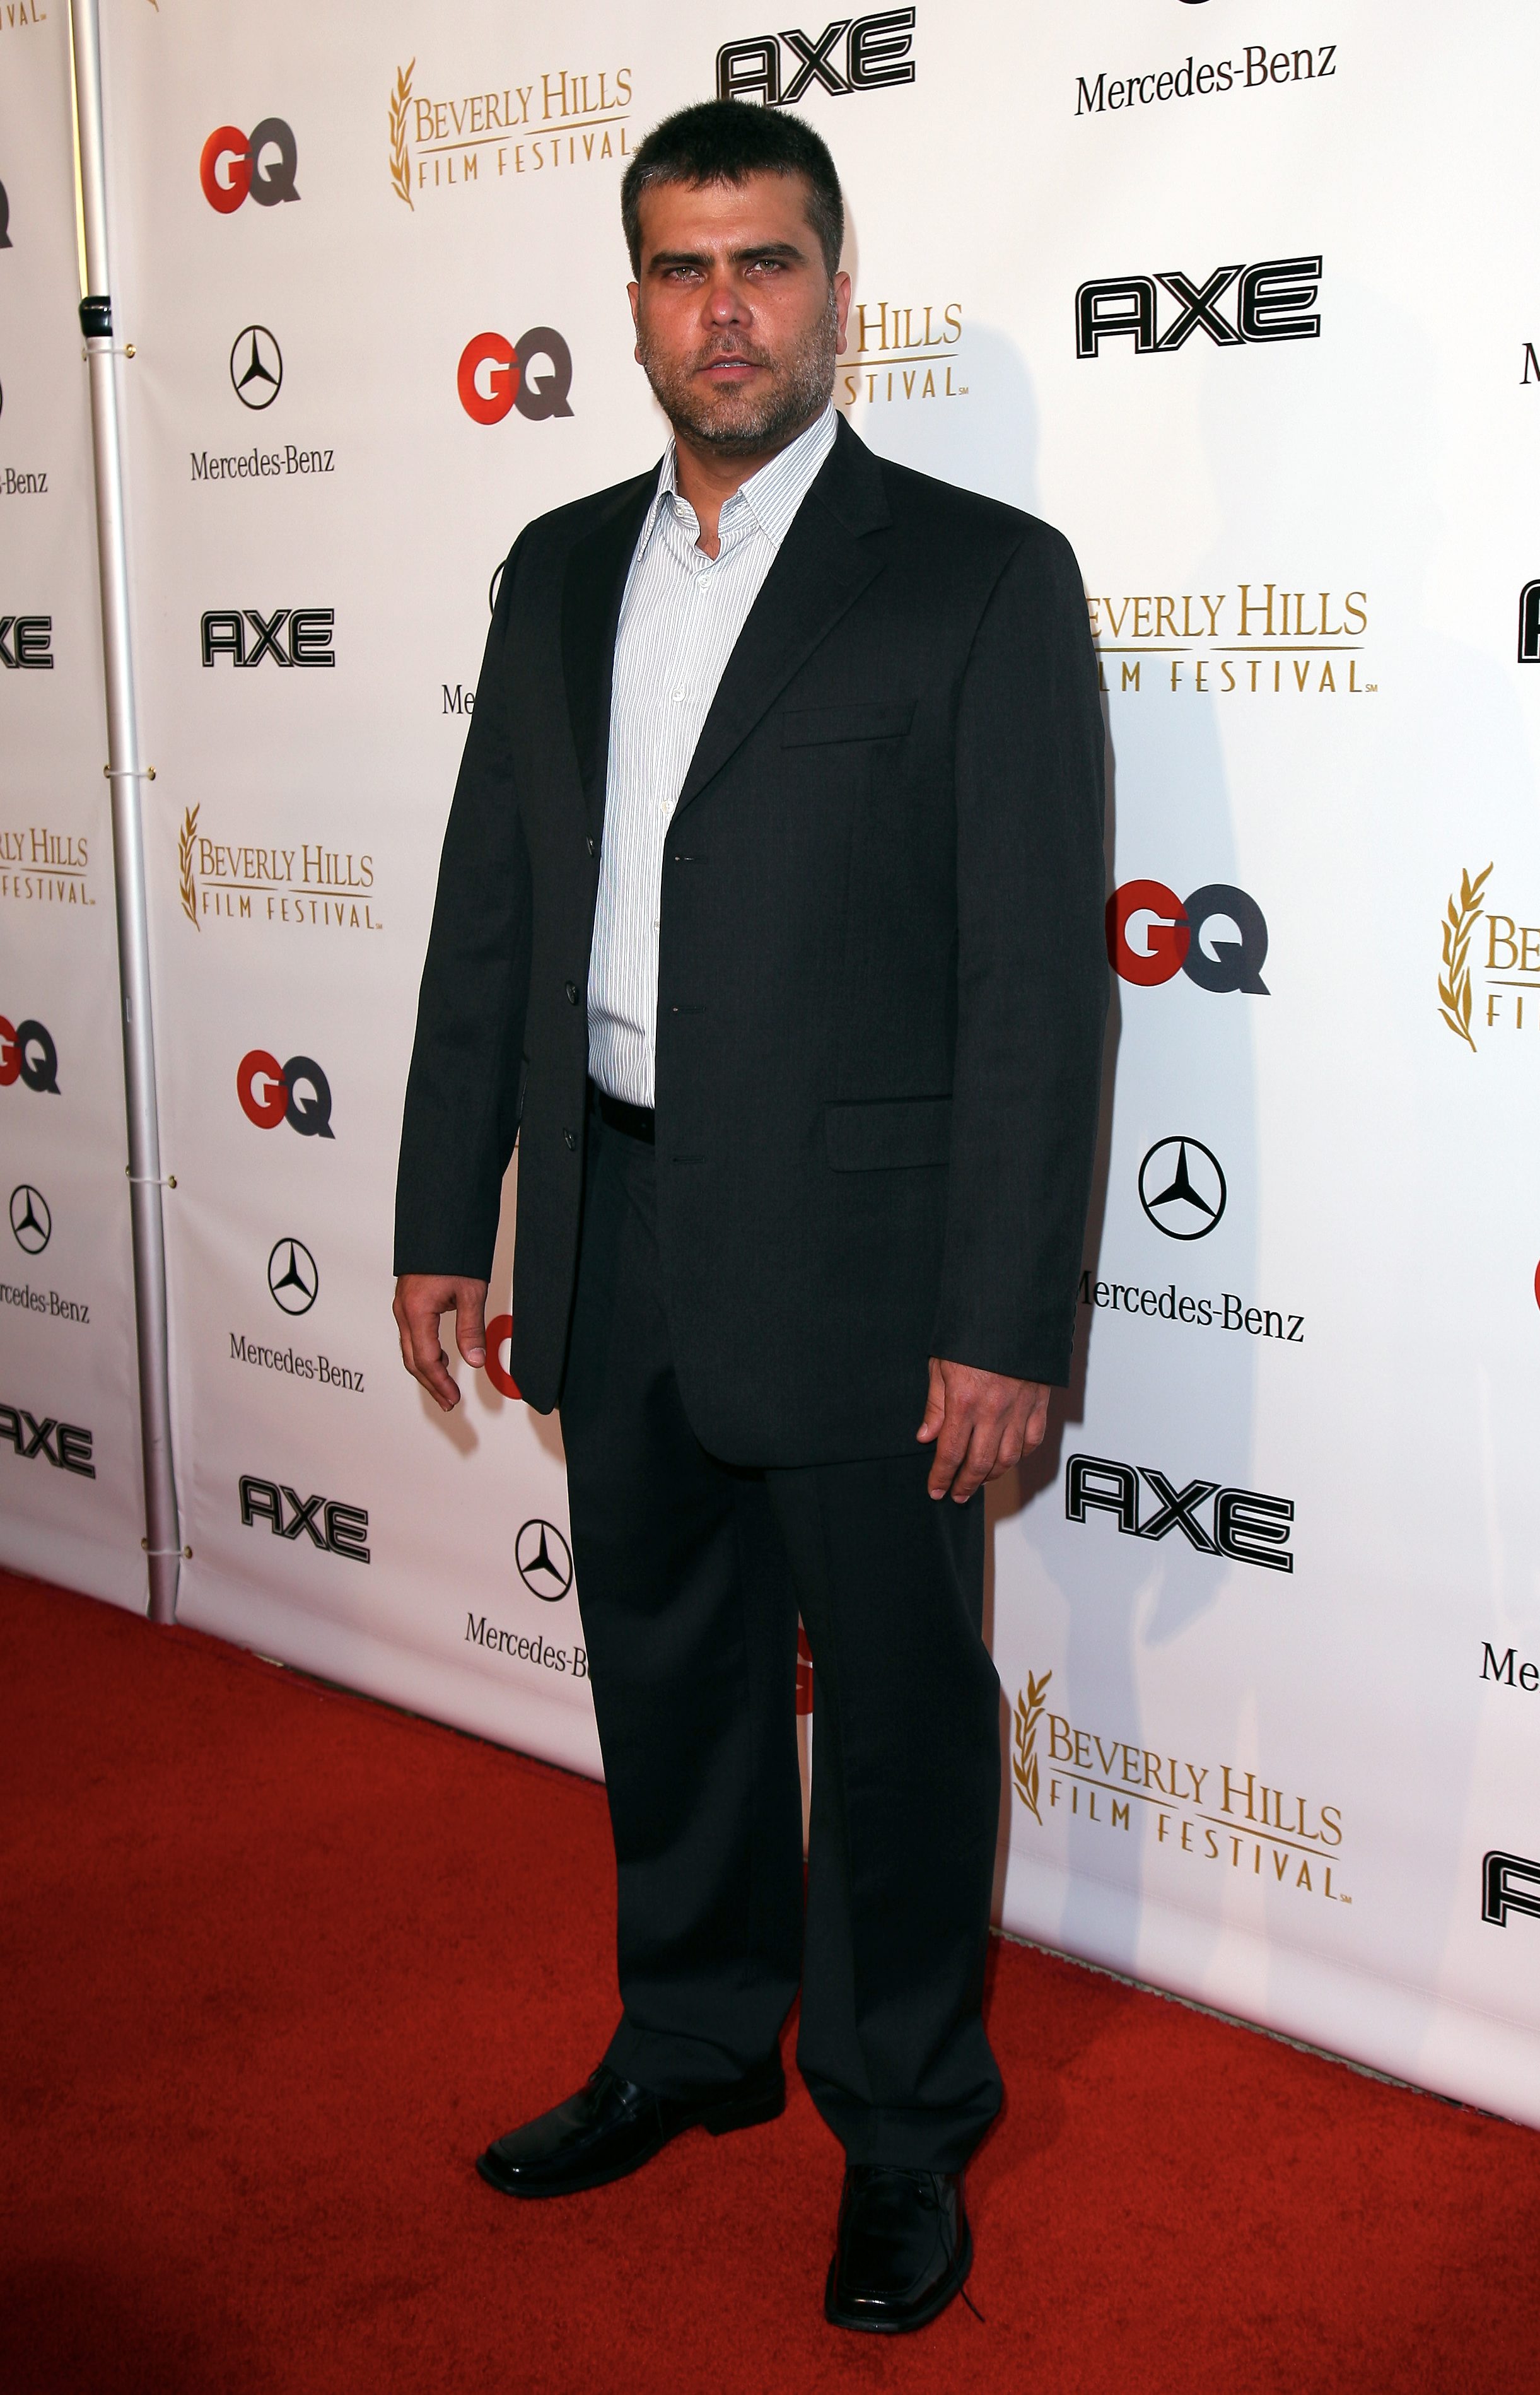 Frederico Lapenda at the World Premiere of Bad Guys at the Beverly Hills Film Festival